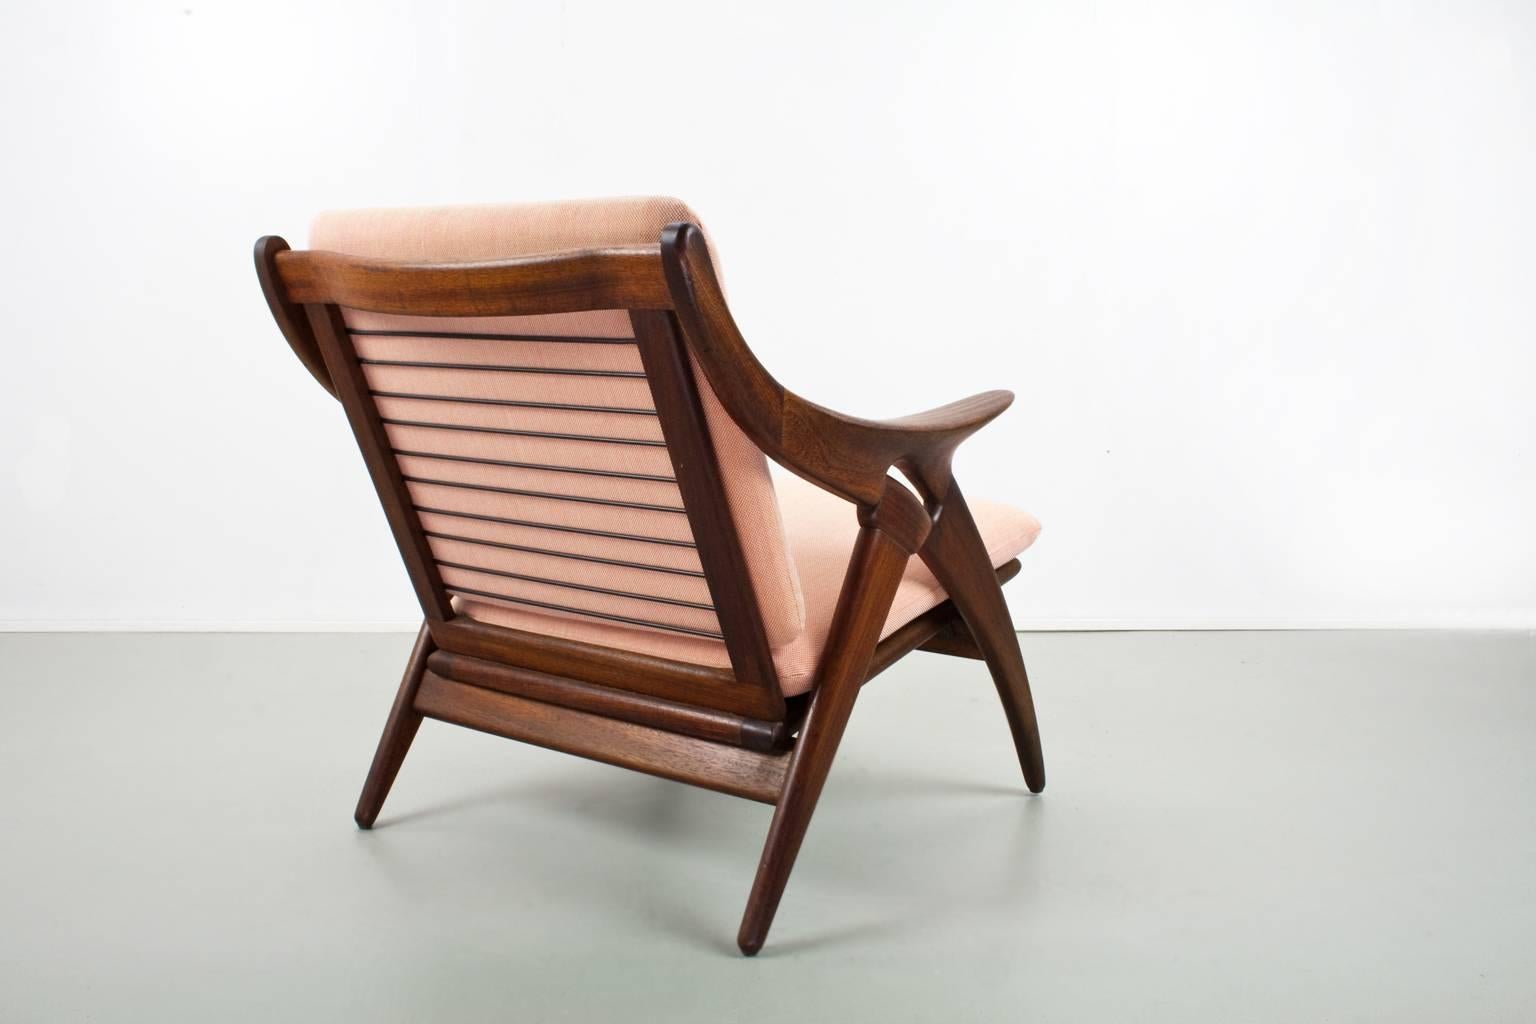 Great organic modern lounge chair Vintage Dutch design, yet completely restored and reupholstered. The chair was designed by Dutch manufacturer De Ster, designer unknown. The design got the name 